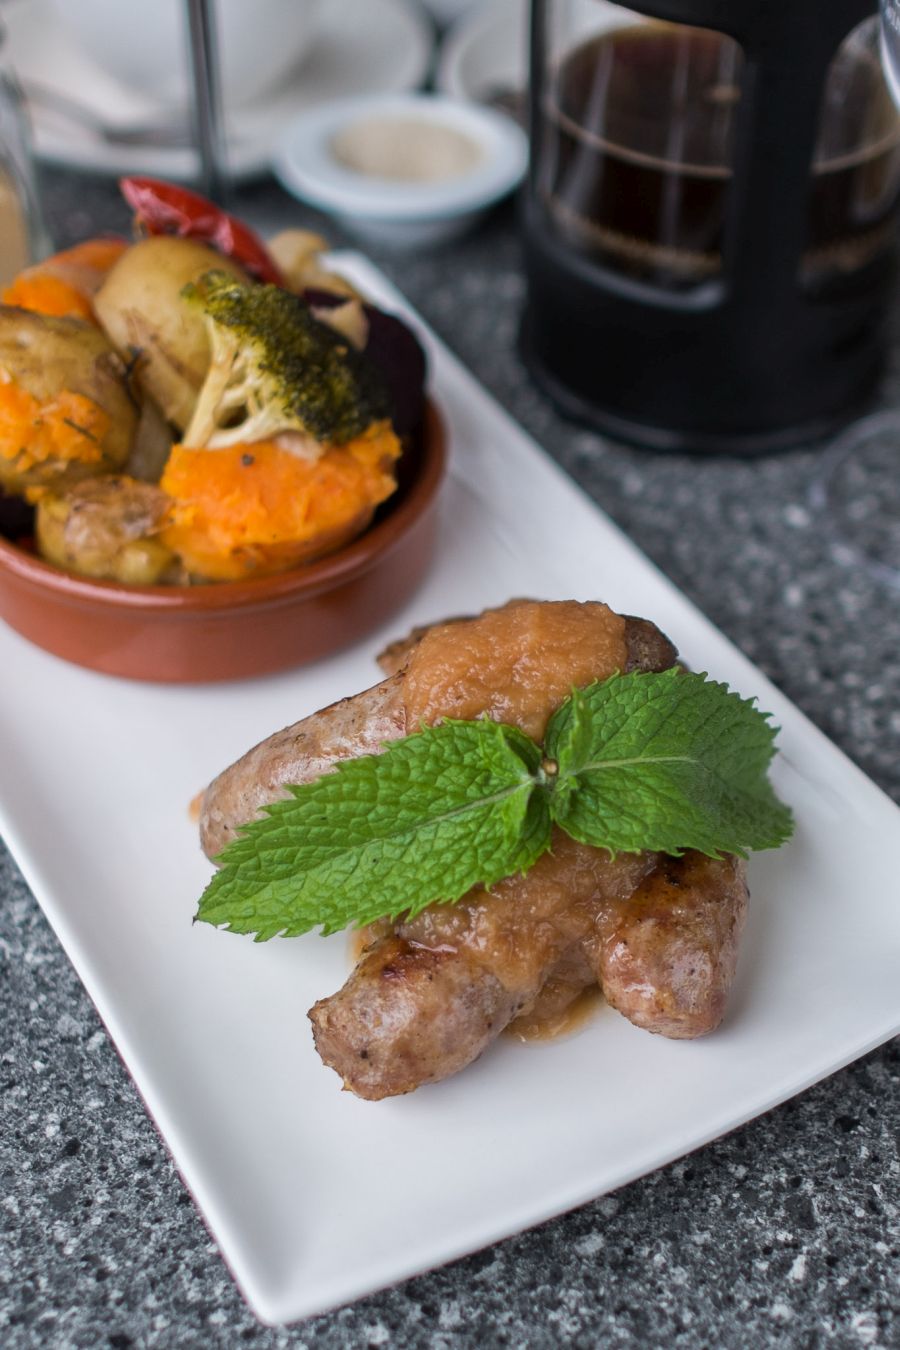 Bruny Toulouse pork sausages (AU$27), served with Pagan Cider infused Apple Isle sauce and vegetables